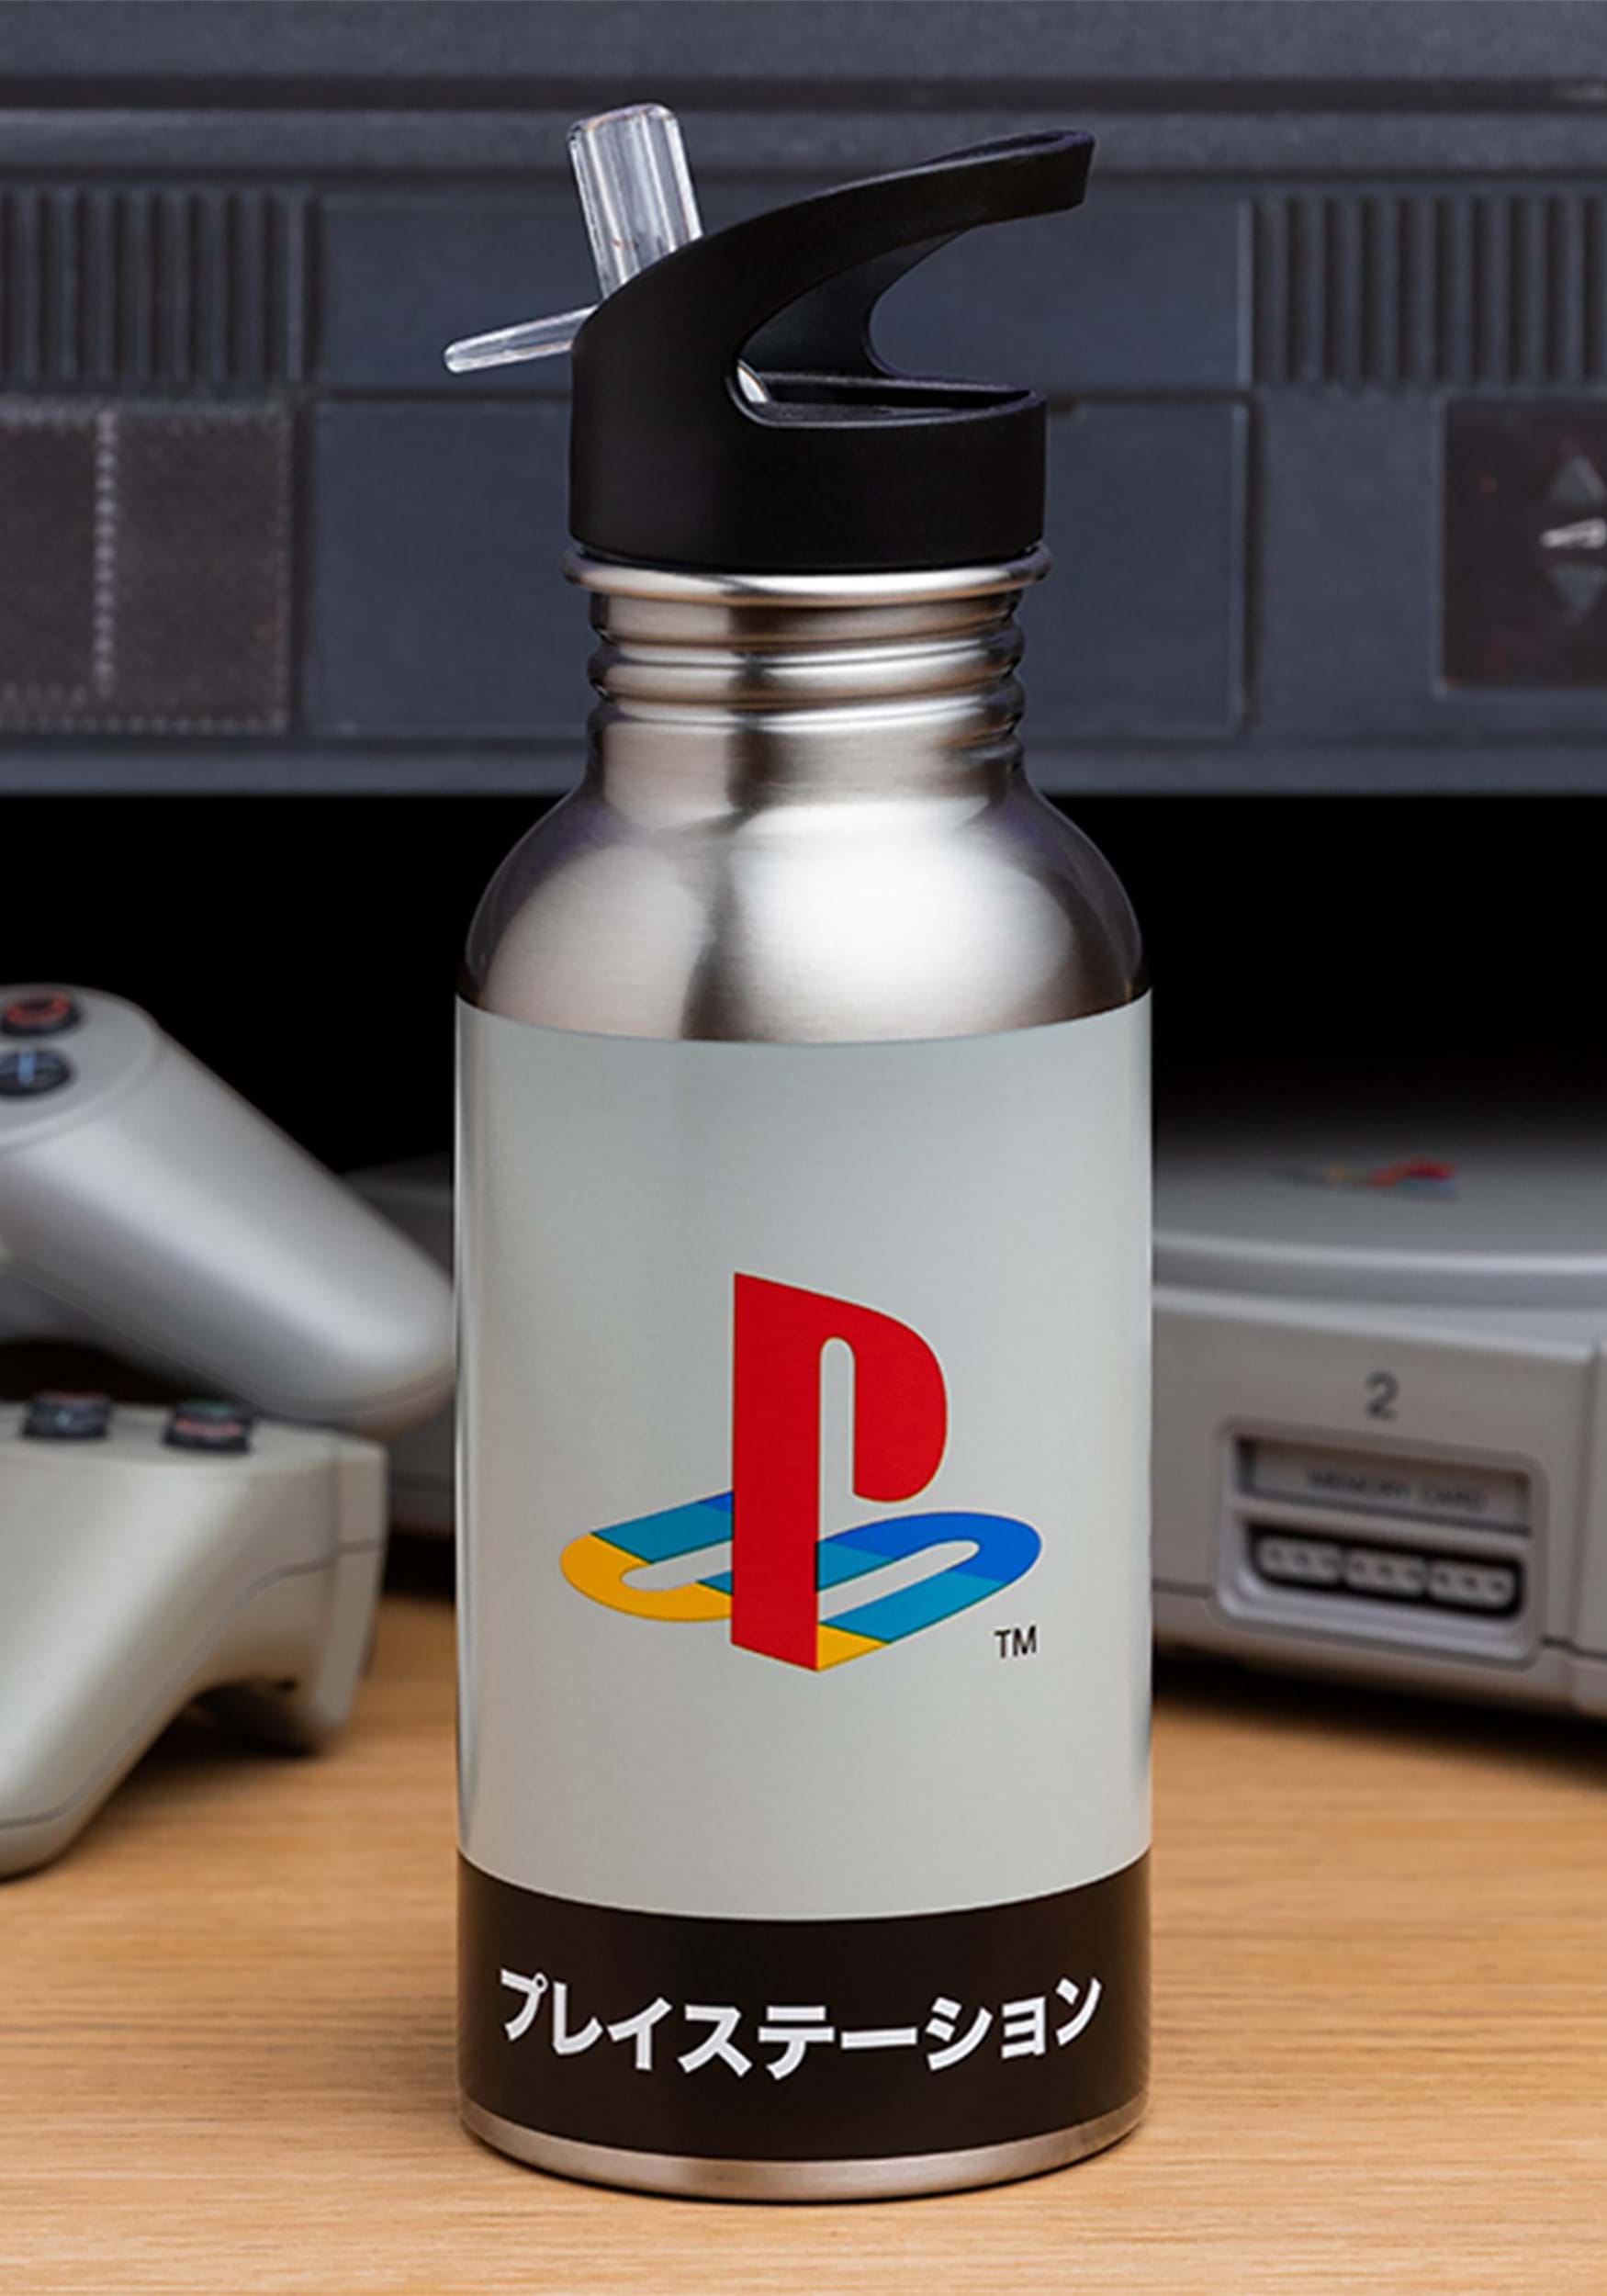 https://images.fun.com/products/82546/2-1-217428/playstation-heritage-metal-water-bottle-w-straw-alt-1.jpg